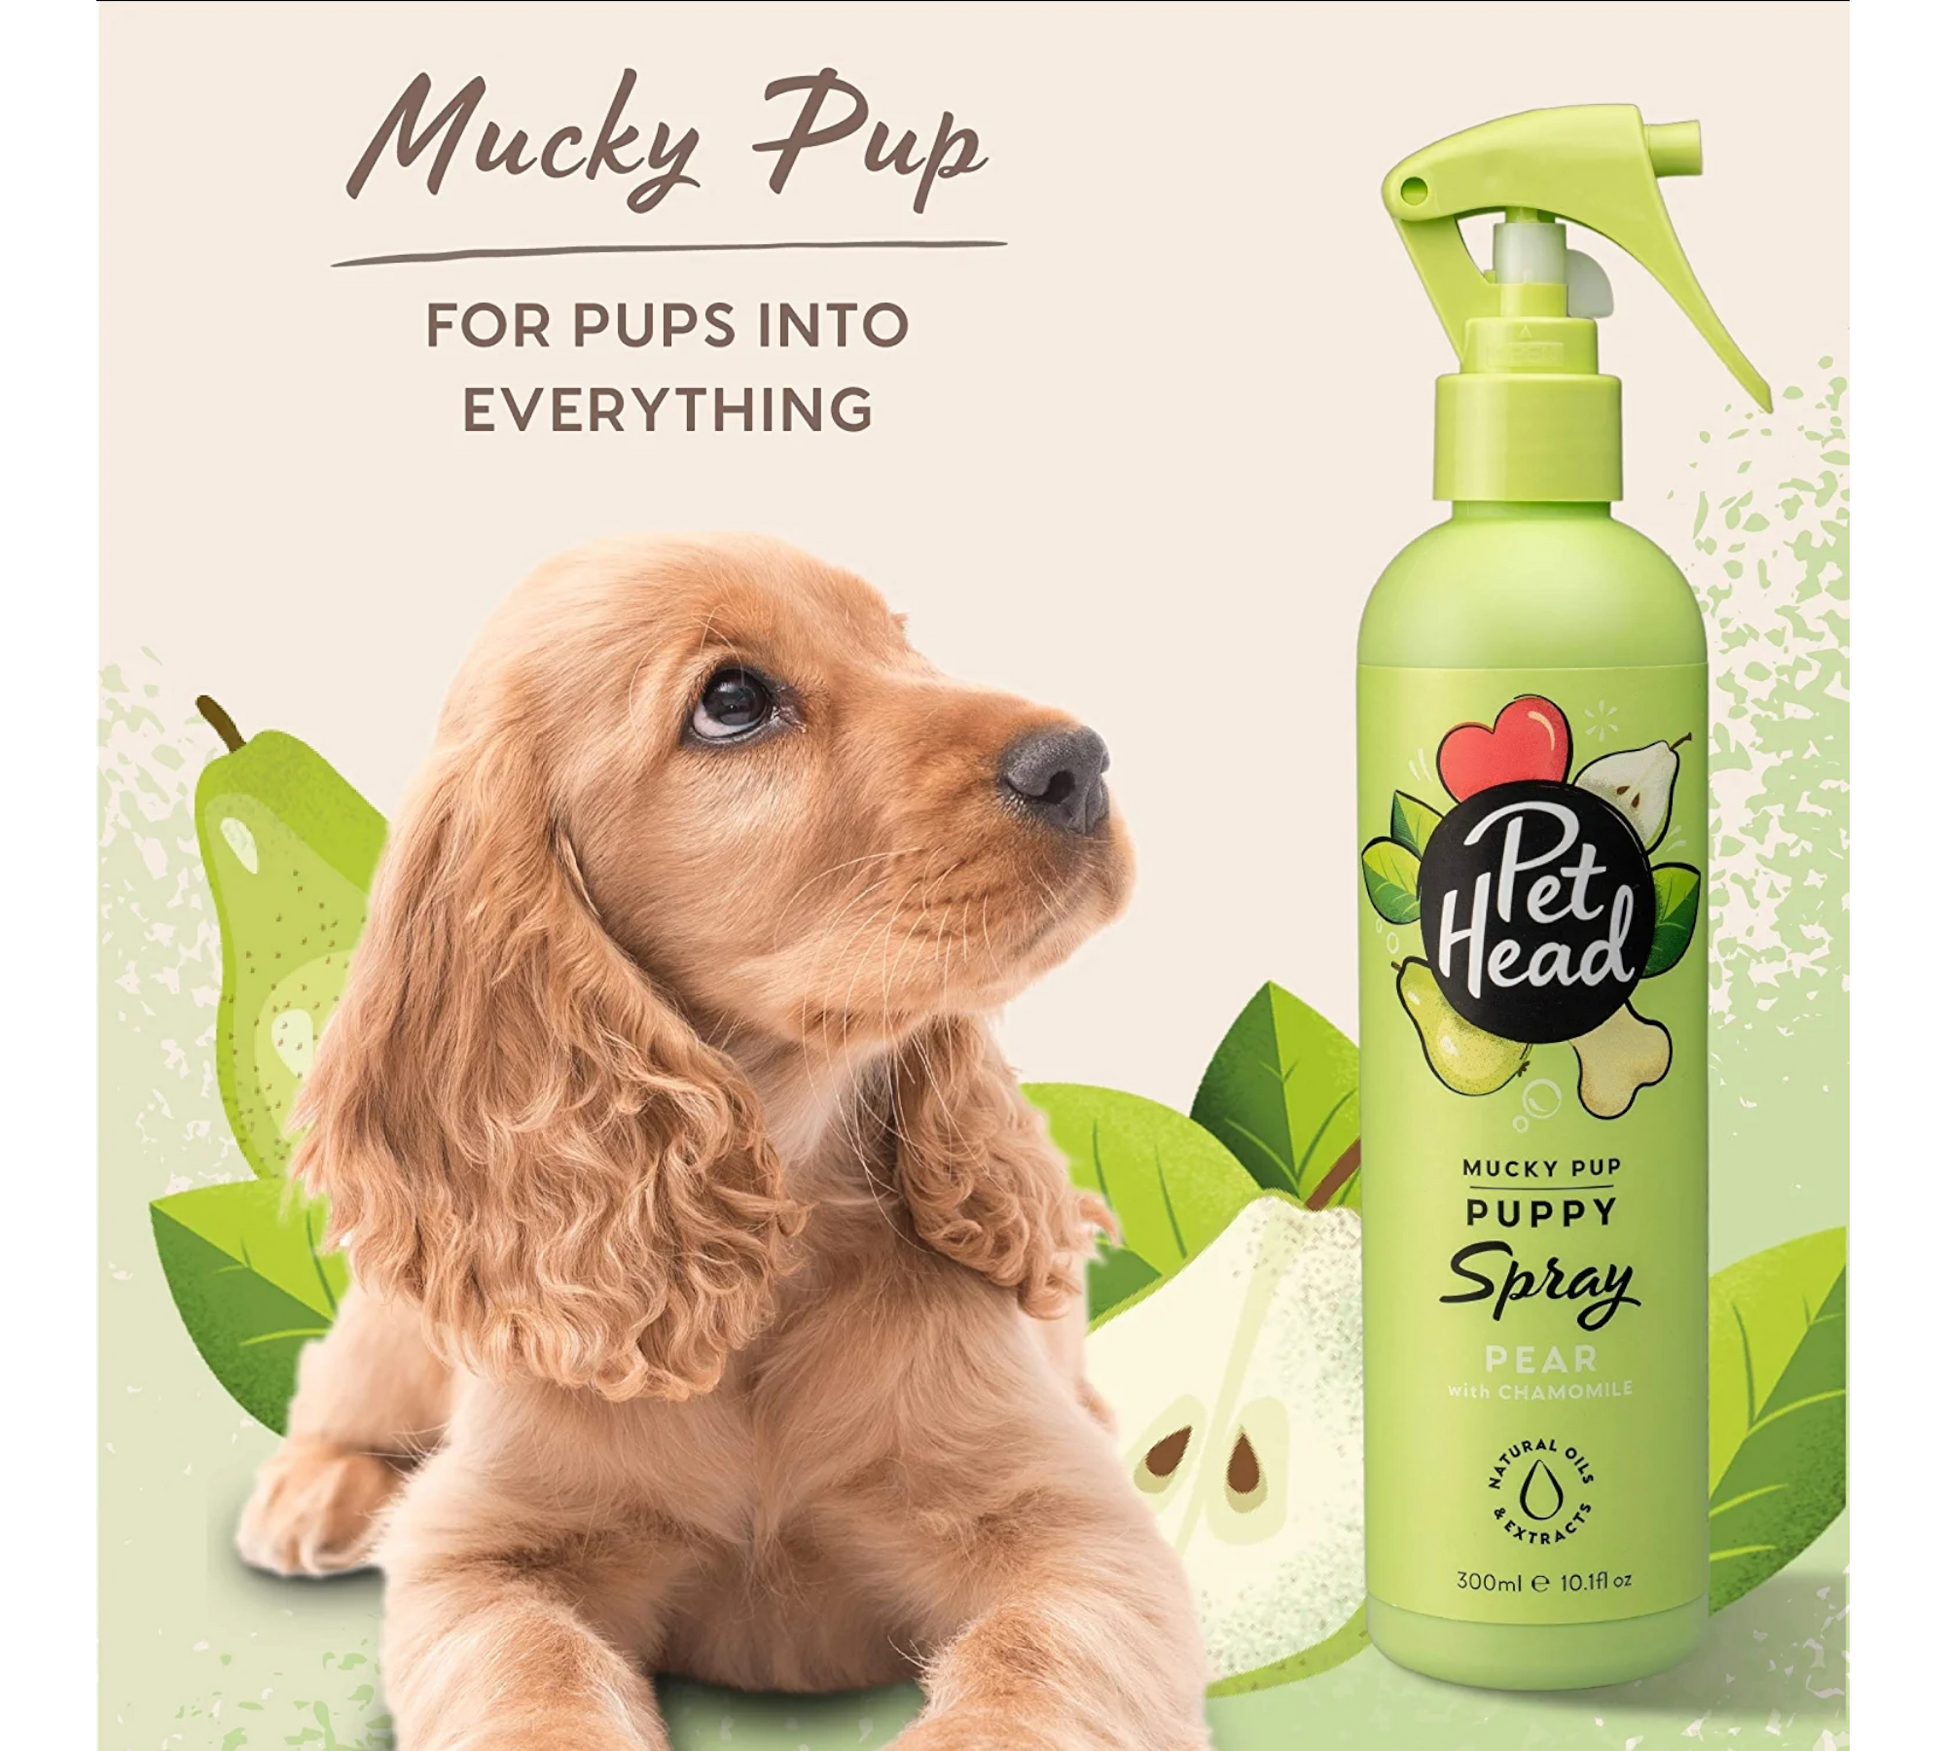 Canine's World Dog Cologne Pet Head Mucky Pup Puppy Spray Pear with Chamomile Pet Head